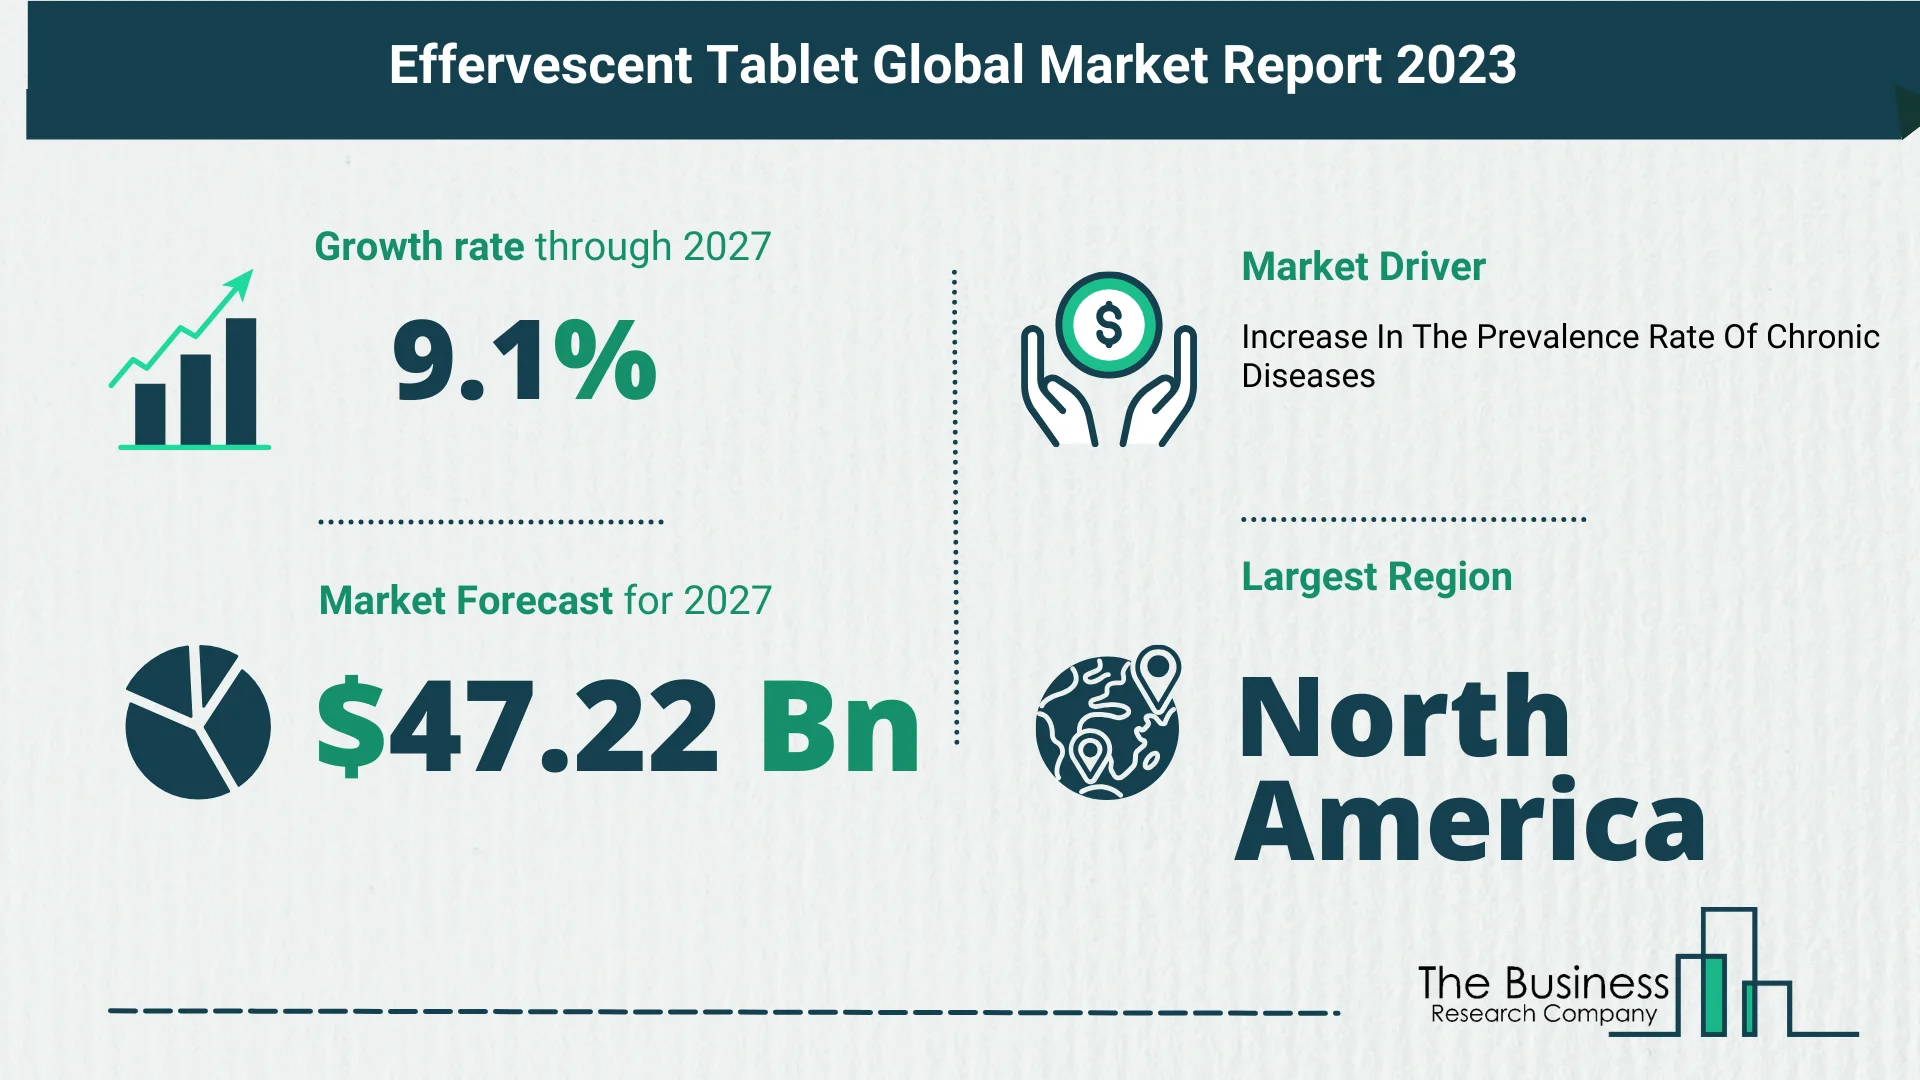 How Is The Effervescent Tablet Market Expected To Grow Through 2023-2032